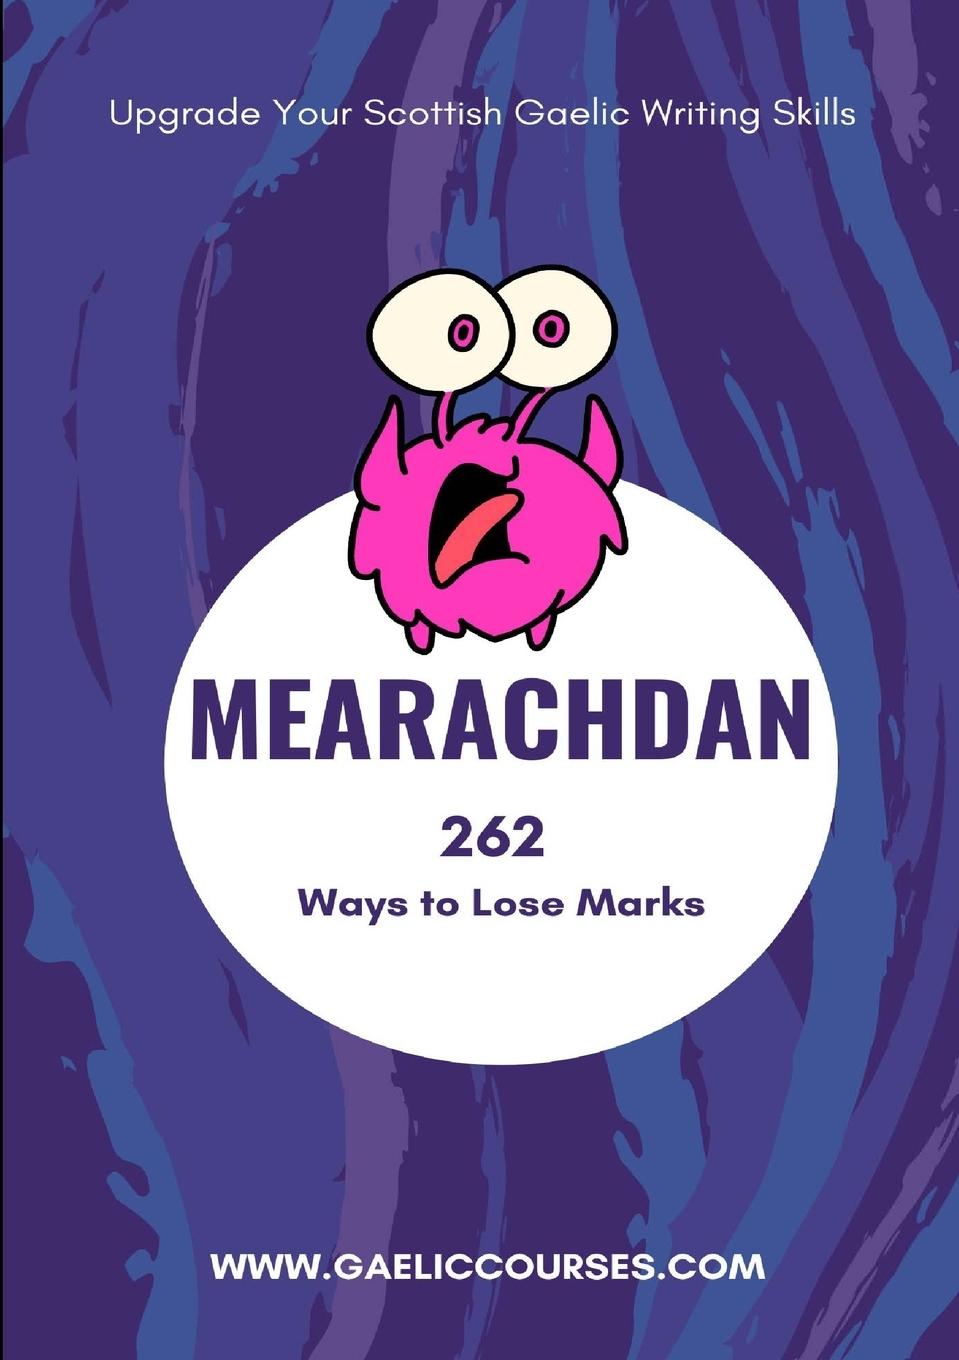 Book Mearachdan - 262 Ways to Lose Marks 